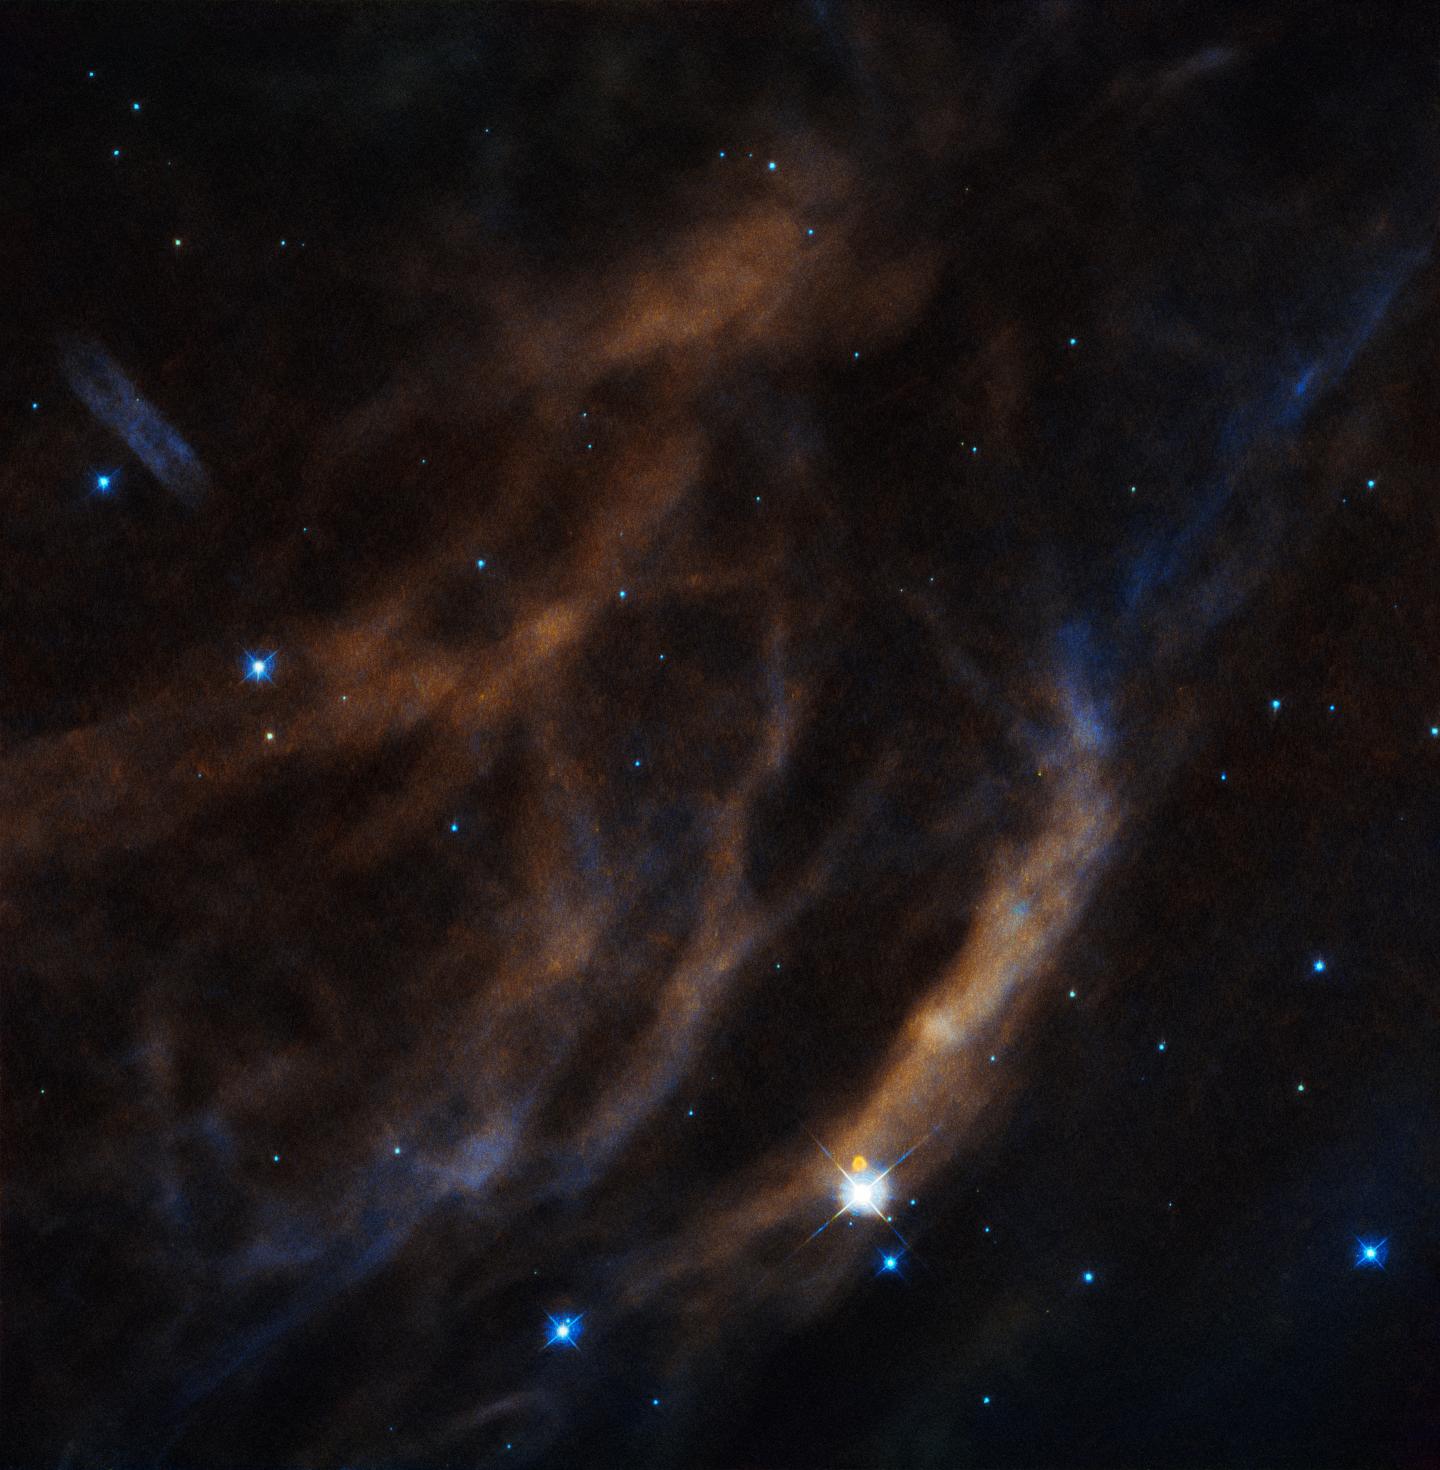 Hubble View of Sh2-308